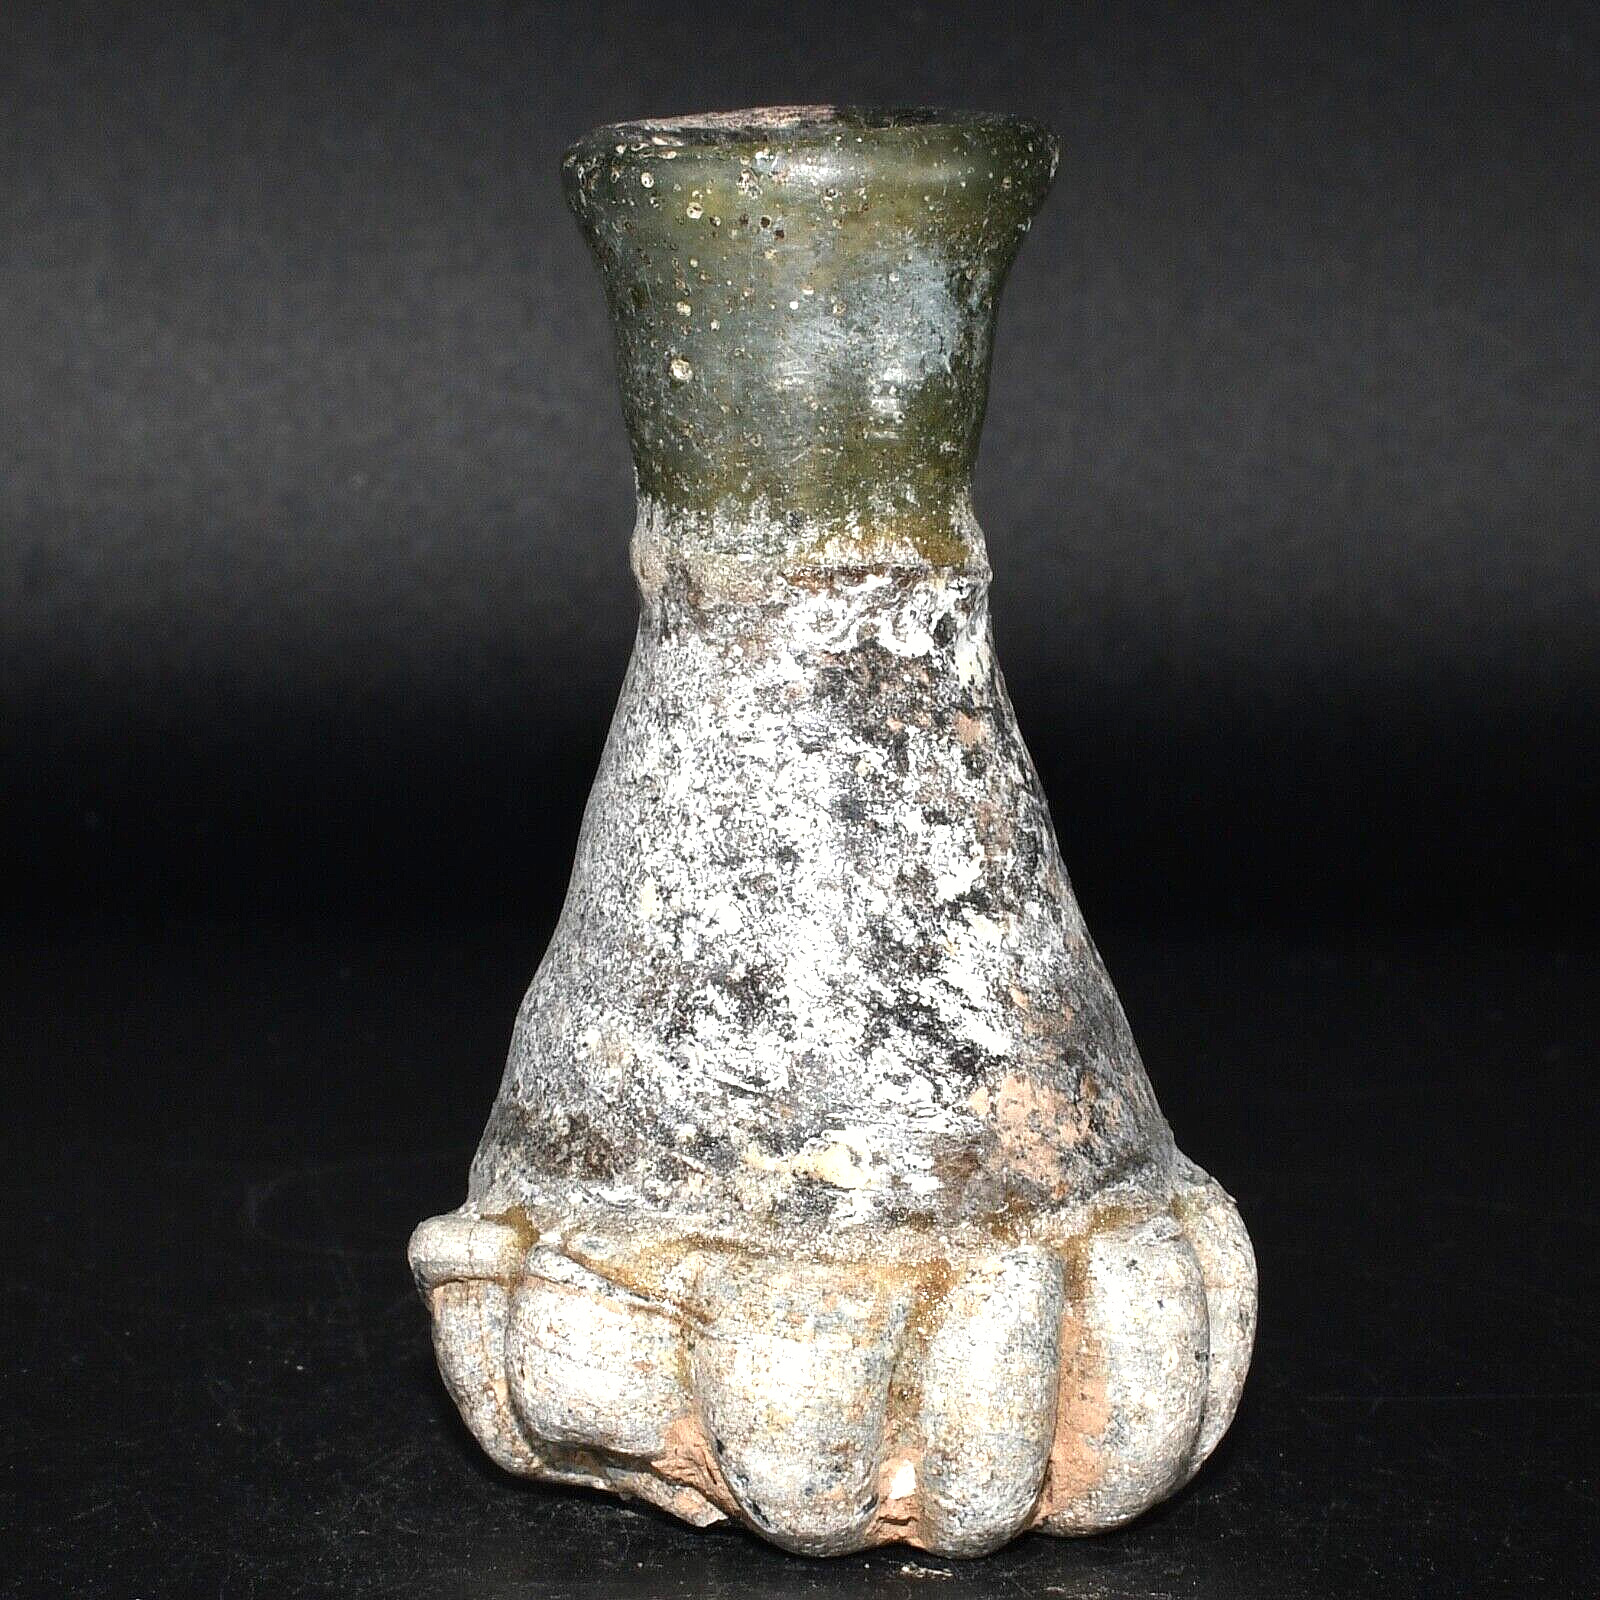 Genuine Ancient Roman Glass Bottle with Iridescent Patina from Israel